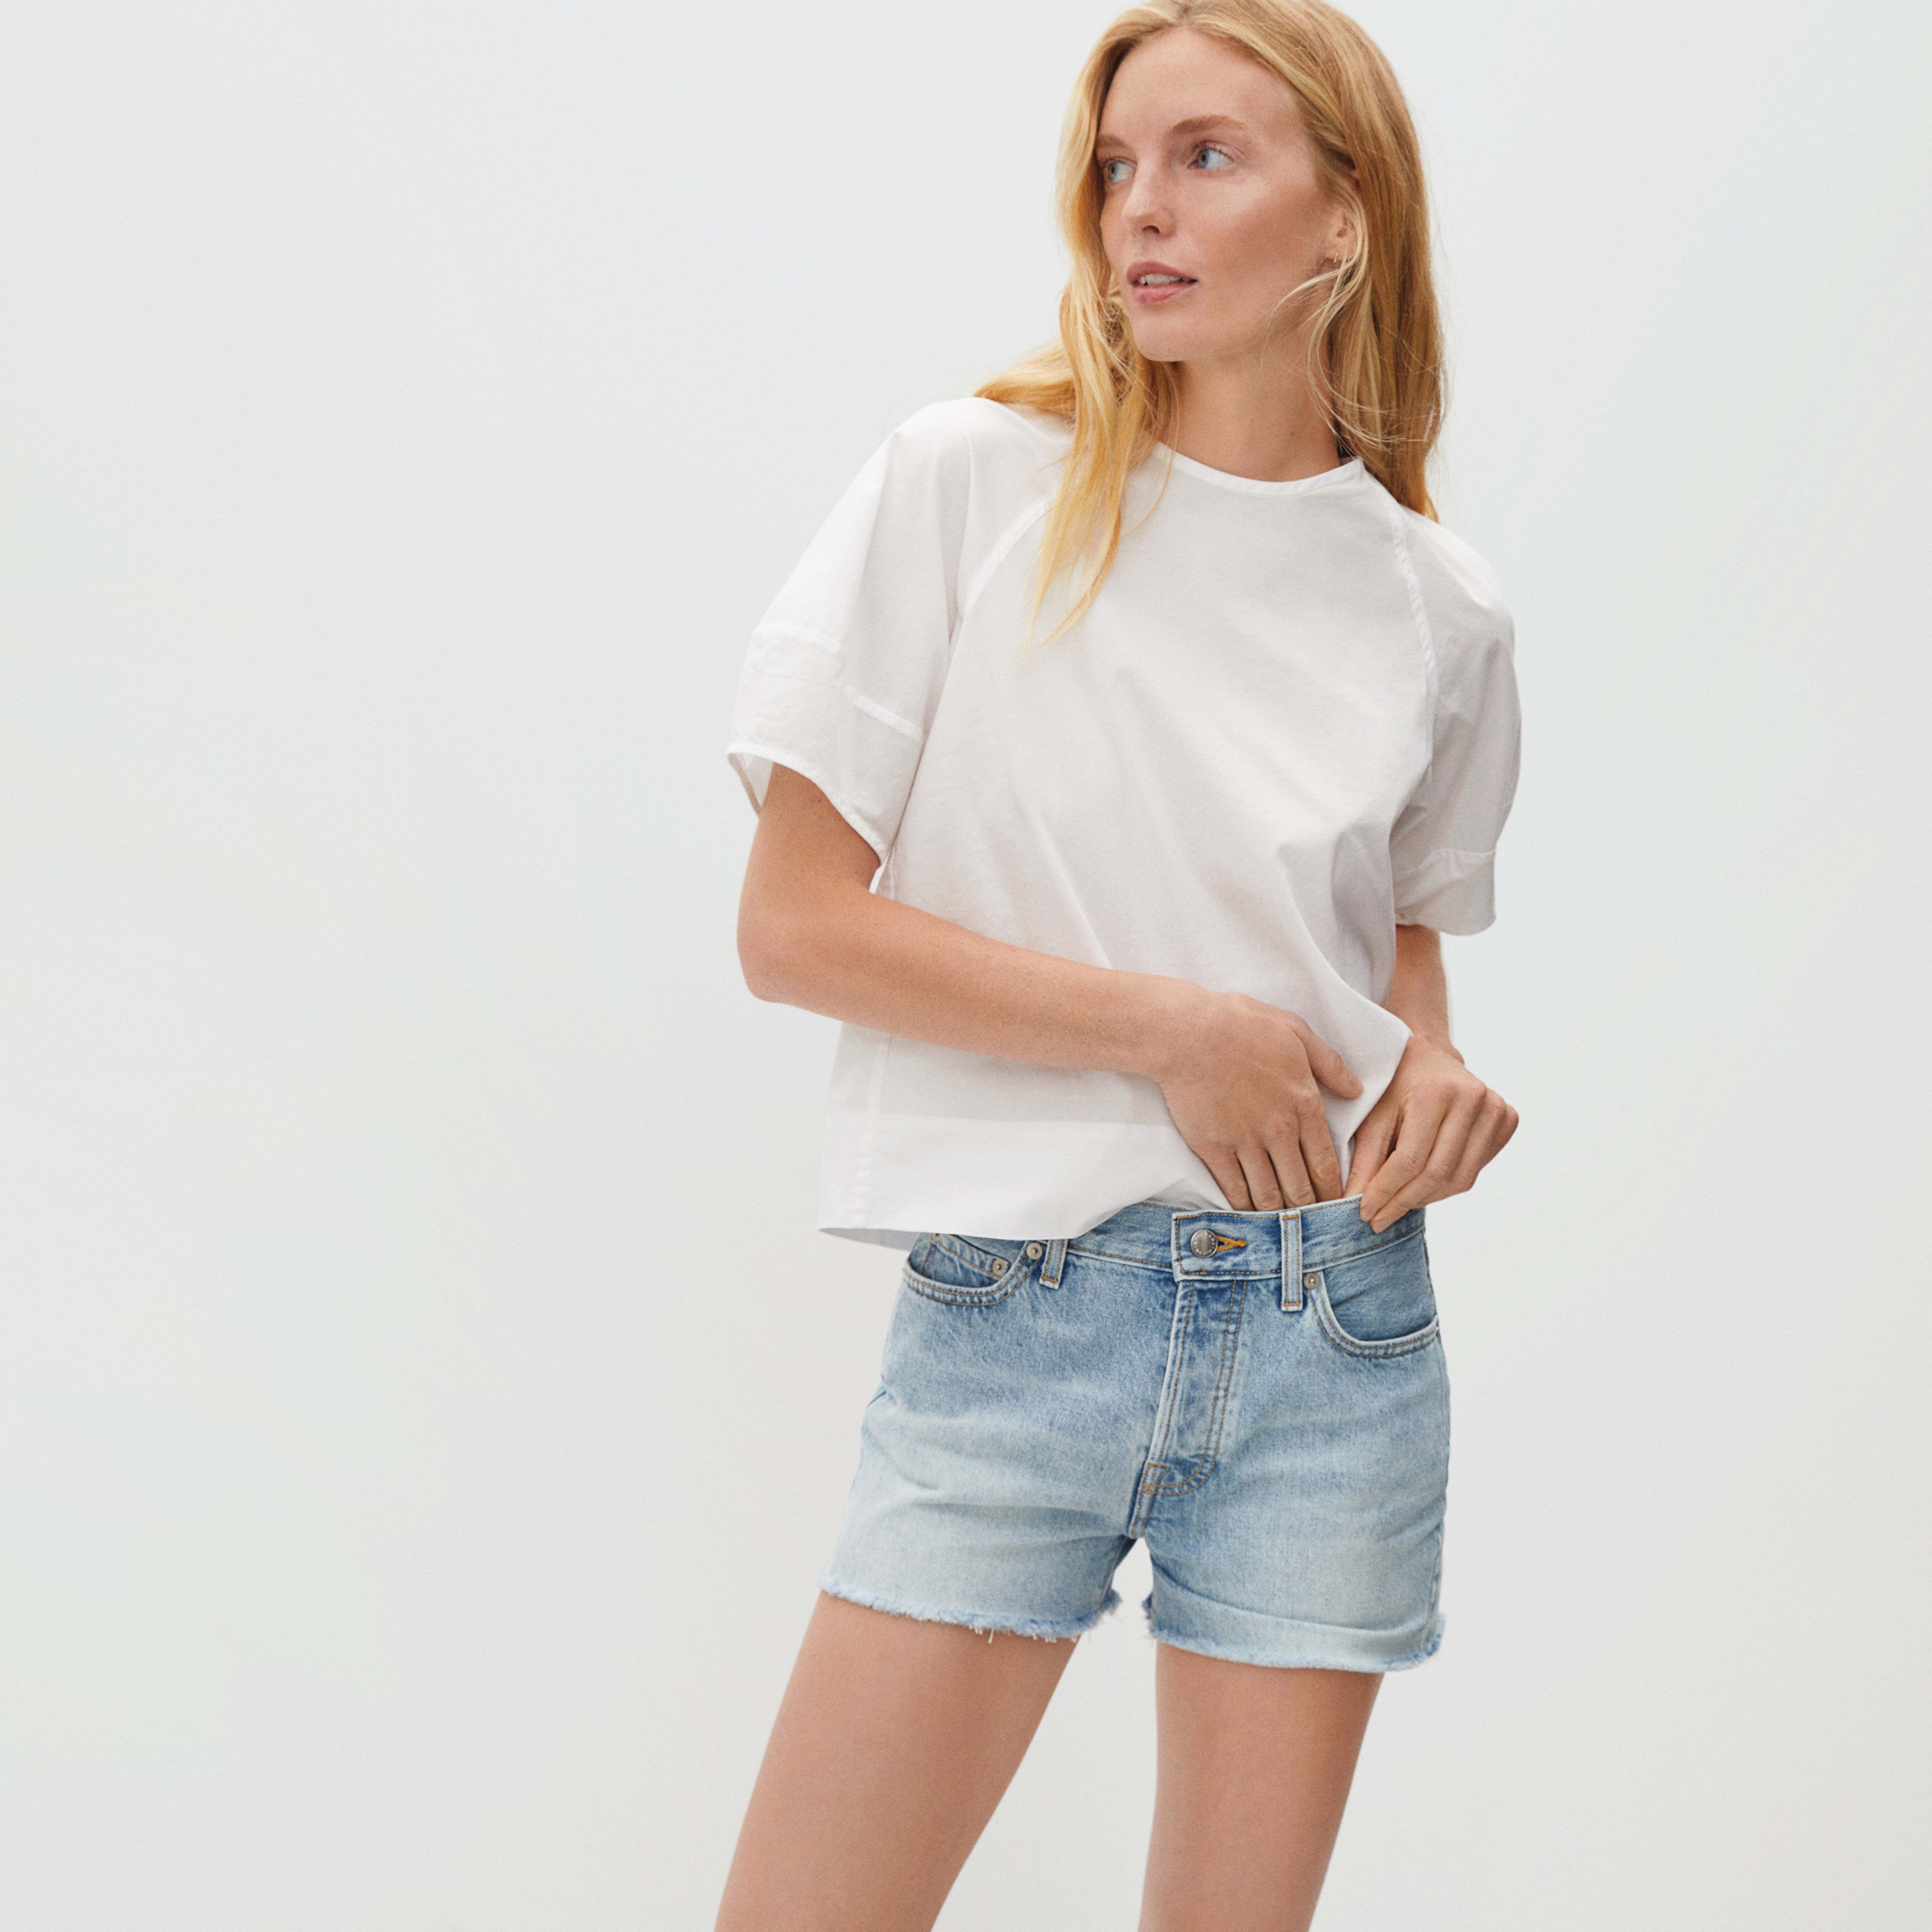 The Relaxed '90s Short | Everlane